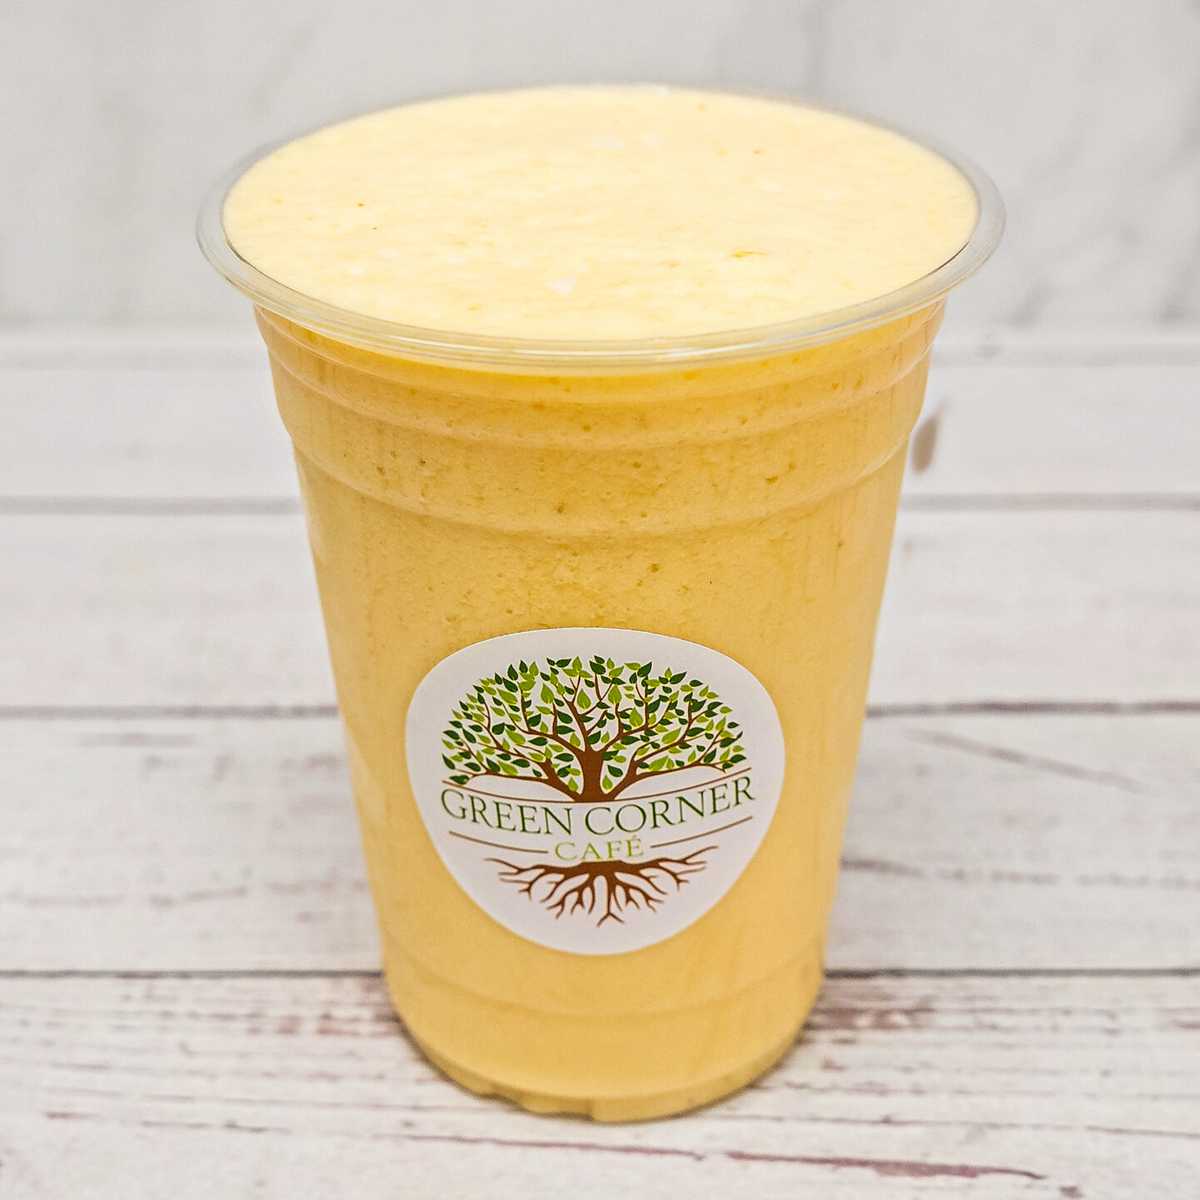 Best Tropical Smoothie in Scotch Plains, NJ – Pineapple, Mango, Banana, Coconut Water, and Vanilla Protein Powder. Refreshing and revitalizing blend.